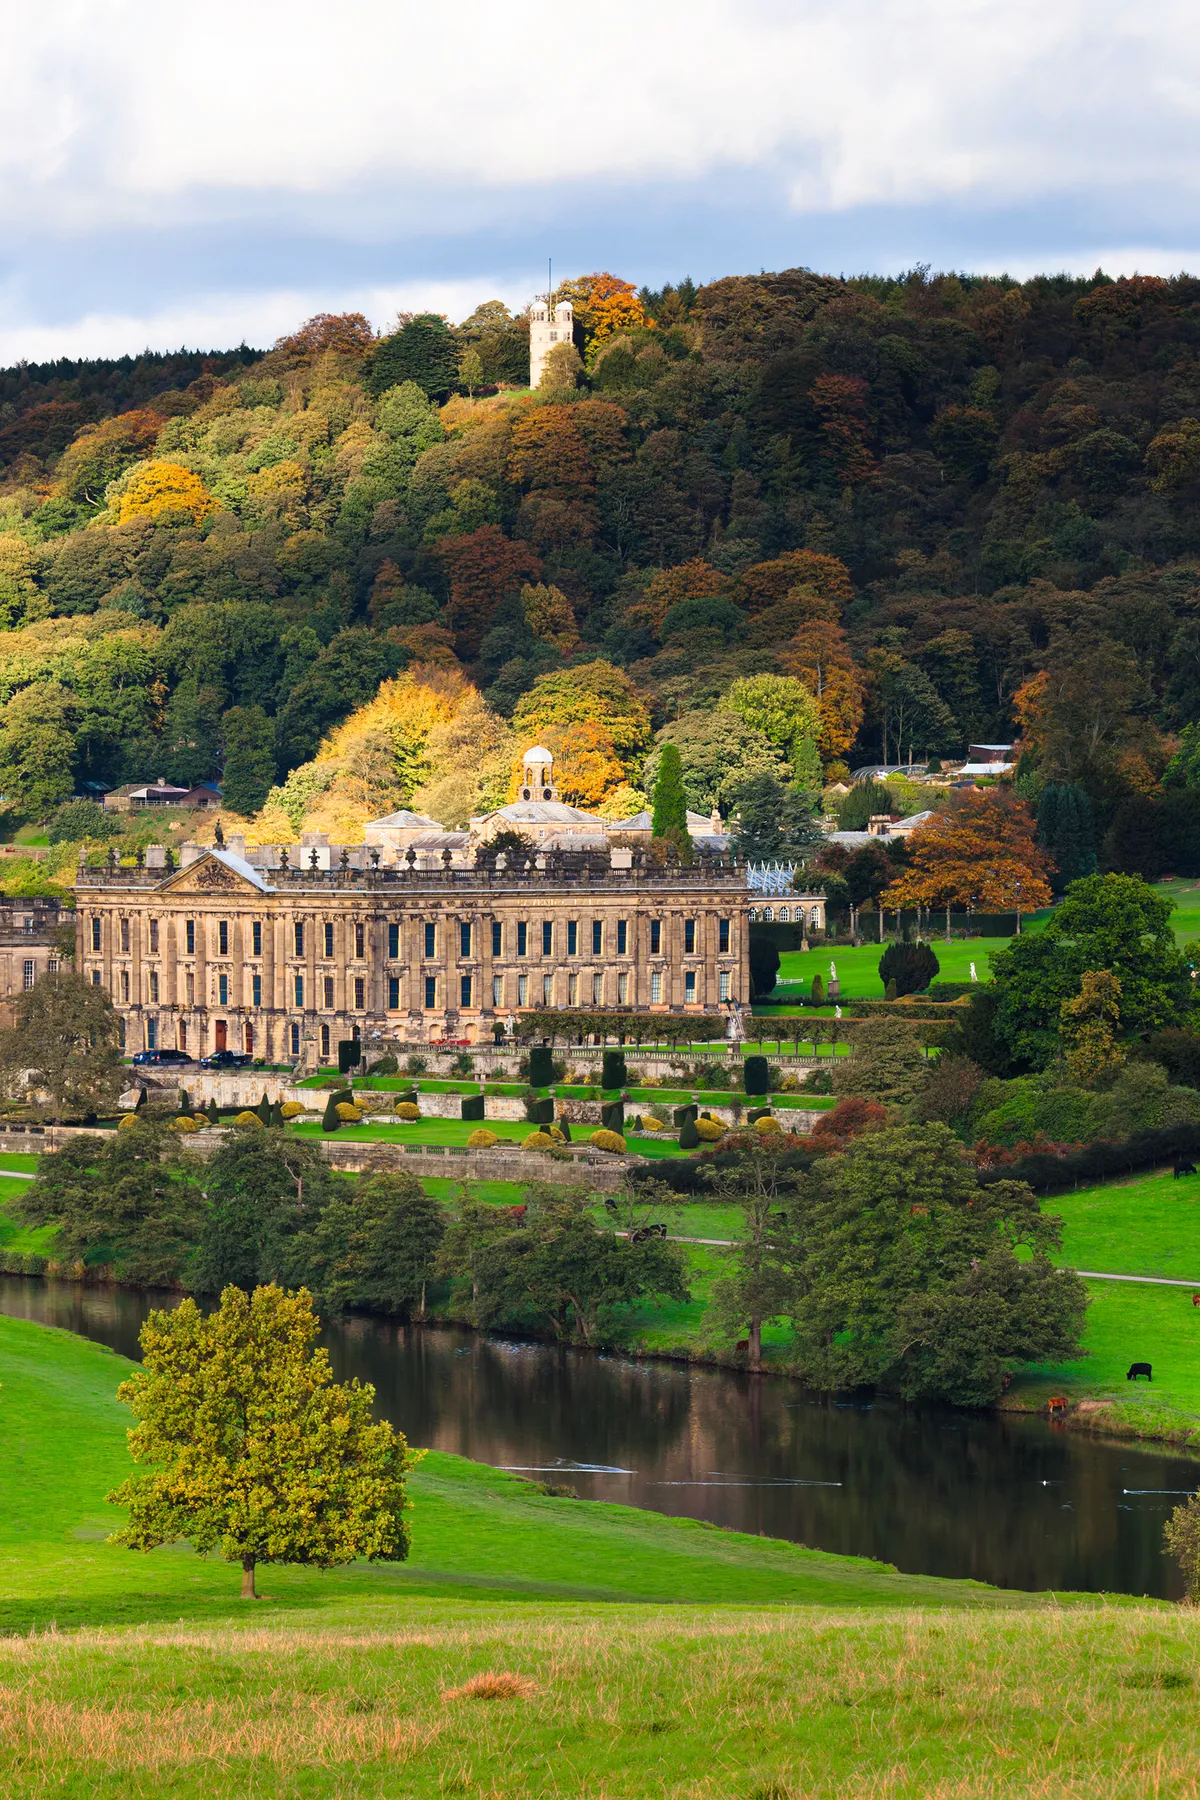 A view of Chatsworth House and Hunting Tower from across the River Derwent